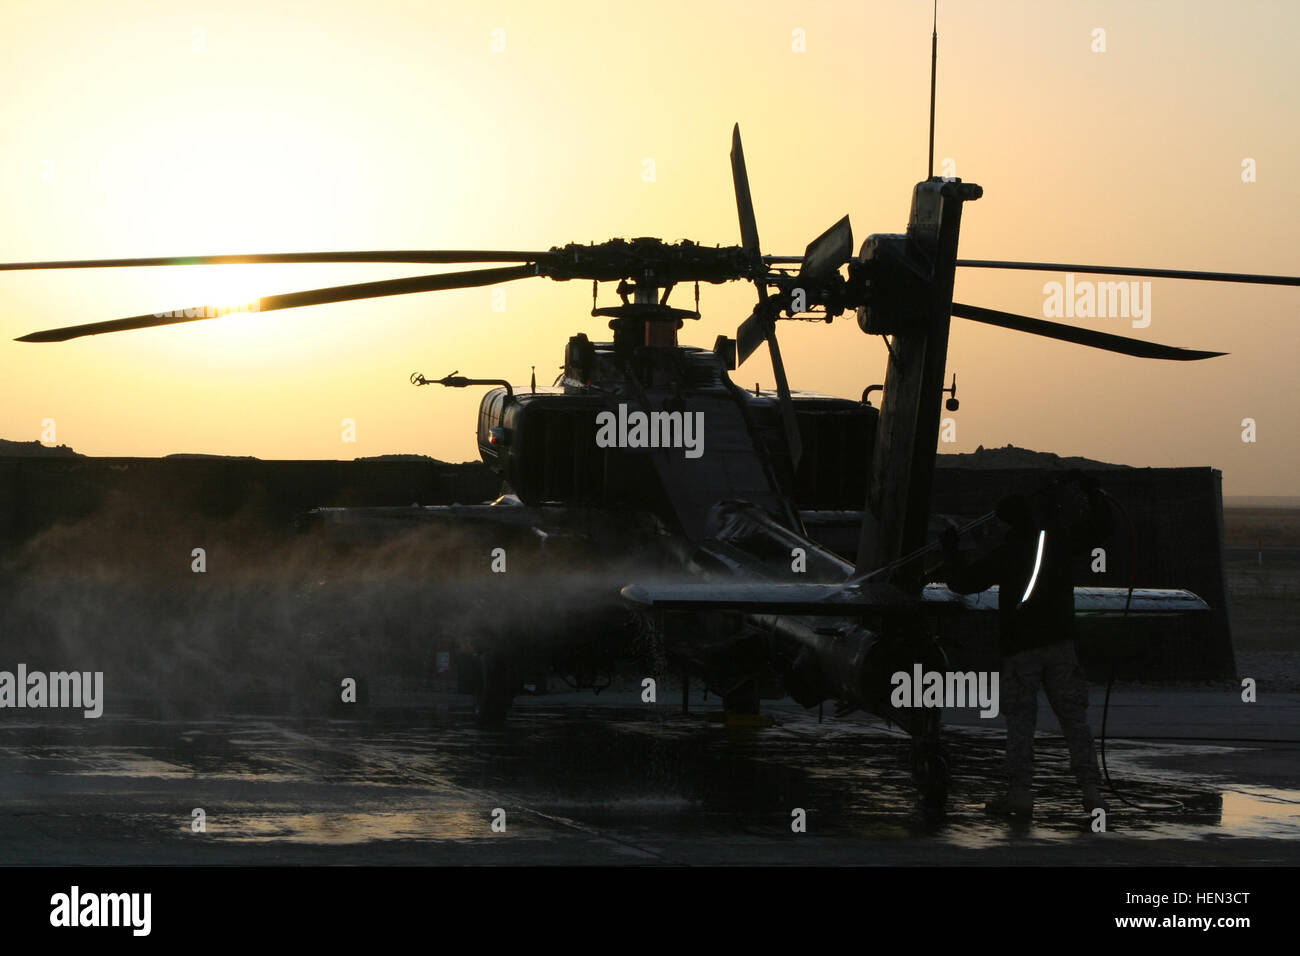 An AH-64D Apache Longbow belonging to 1st Attack Reconnaissance Battalion, 1st Aviation Regiment, is washed down by ground crew in preparation for a night mission on Dec. 22. The 1-1 ARB “Gunfighter” air and ground crews work around the clock sustaining air operations and are part of the Combat Aviation Brigade, 1st Infantry Division, from Fort Riley Kan., flying in support of Task Force Iron, 1st Armored Division, in northern Iraq. (Photo by U.S. Army Maj. Enrique T. Vasquez) Mission at Sunset 70900 Stock Photo